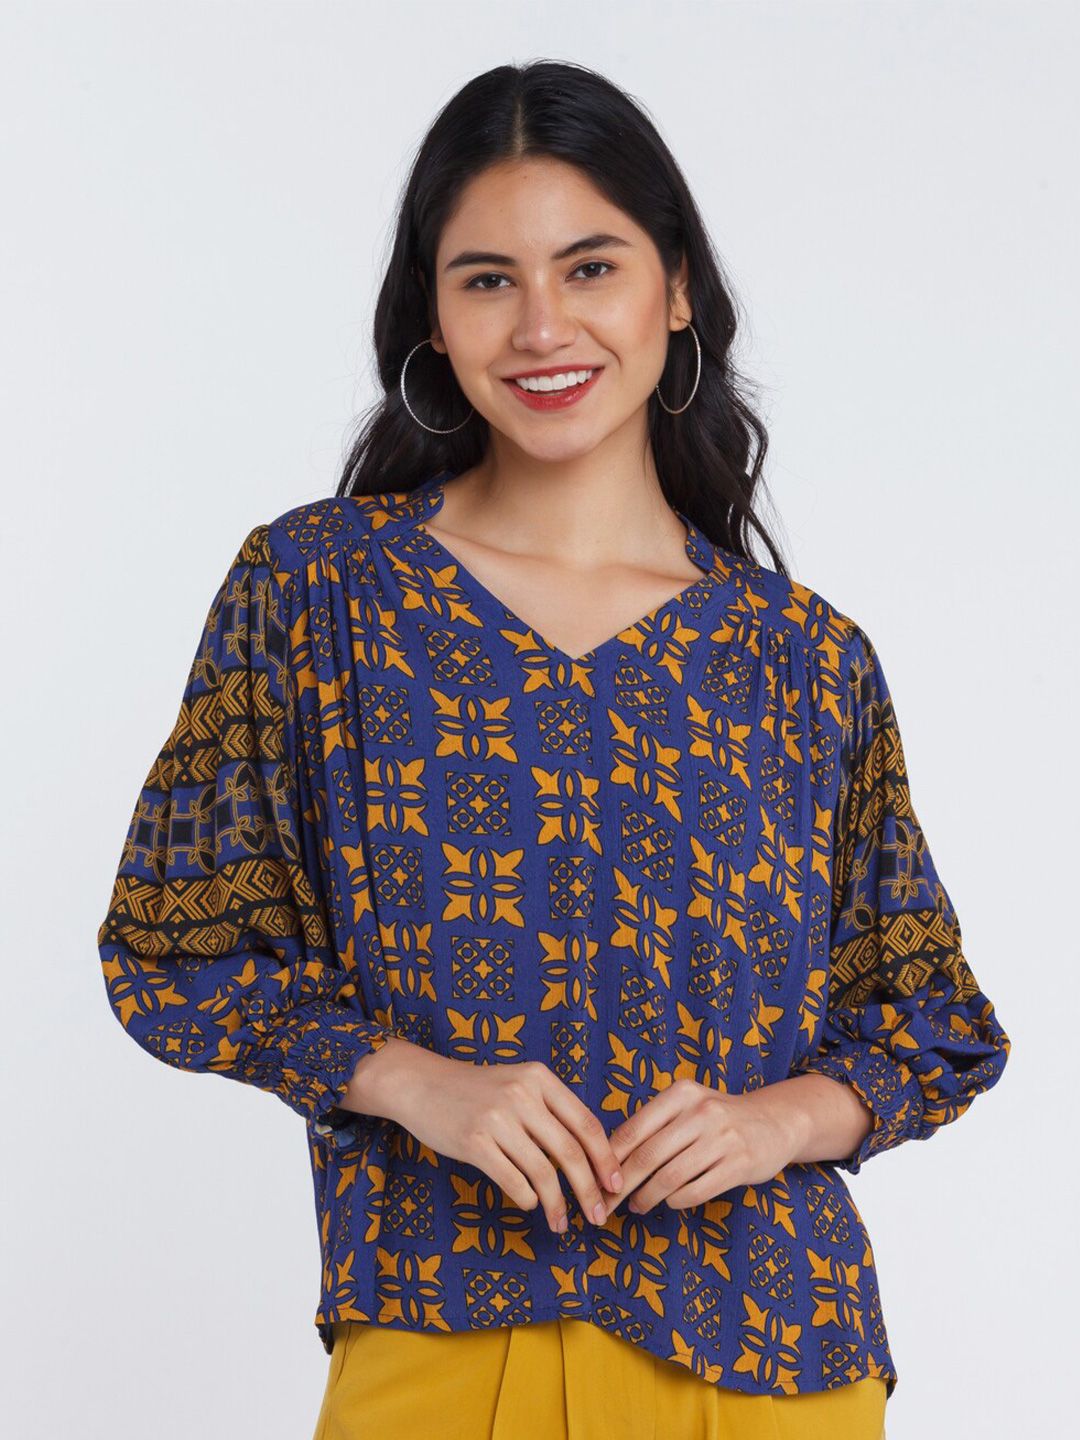 Zink London Blue Floral Print Top Price in India